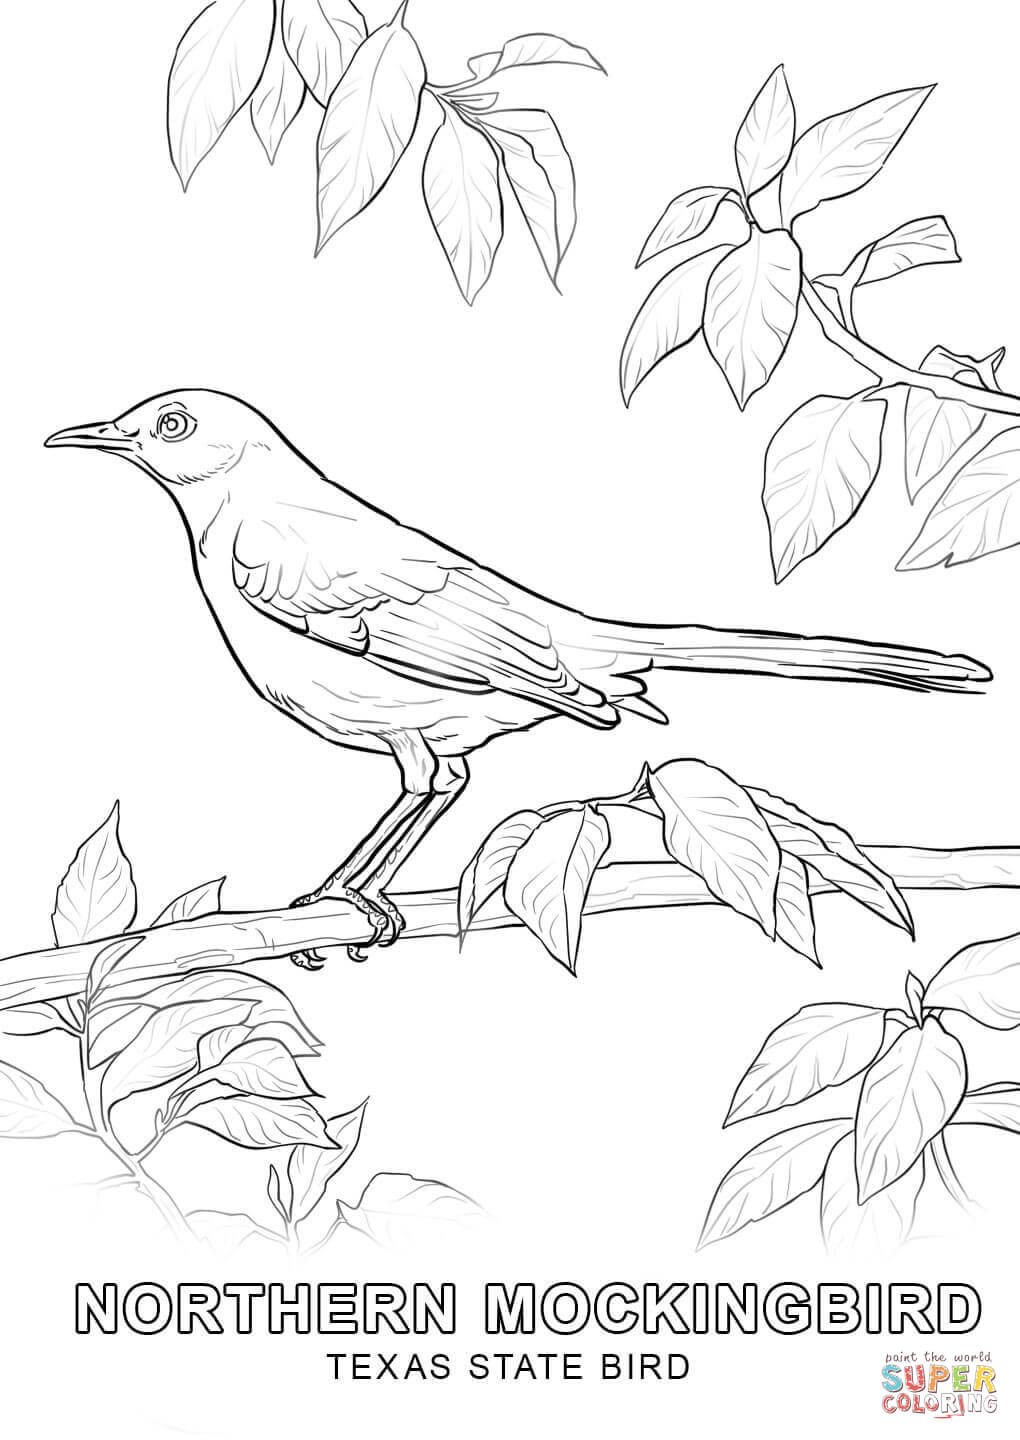 Texas State Bird coloring page